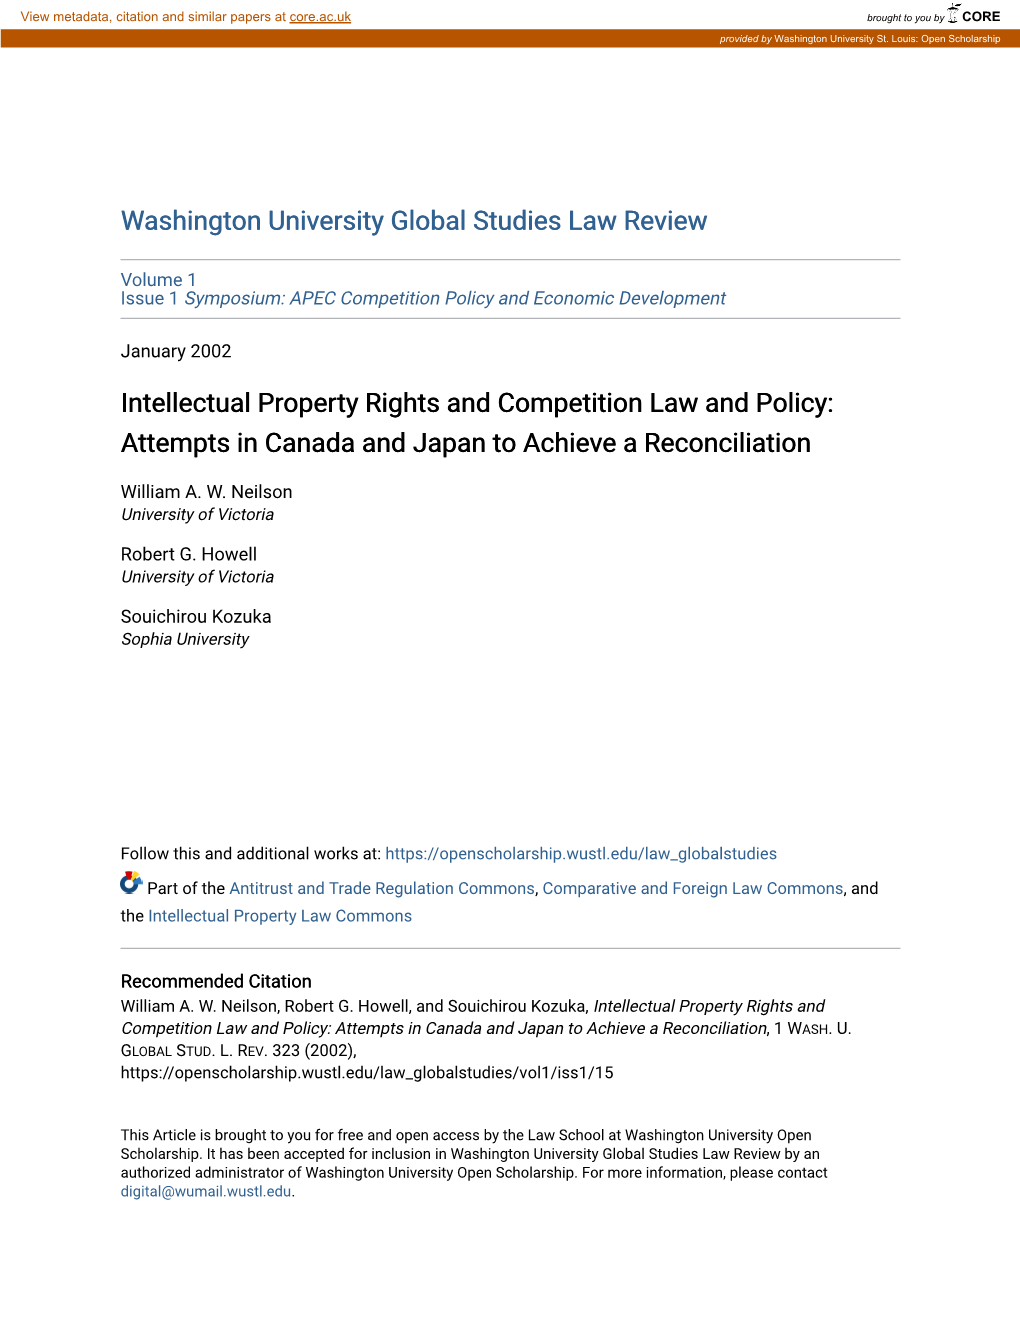 Intellectual Property Rights and Competition Law and Policy: Attempts in Canada and Japan to Achieve a Reconciliation